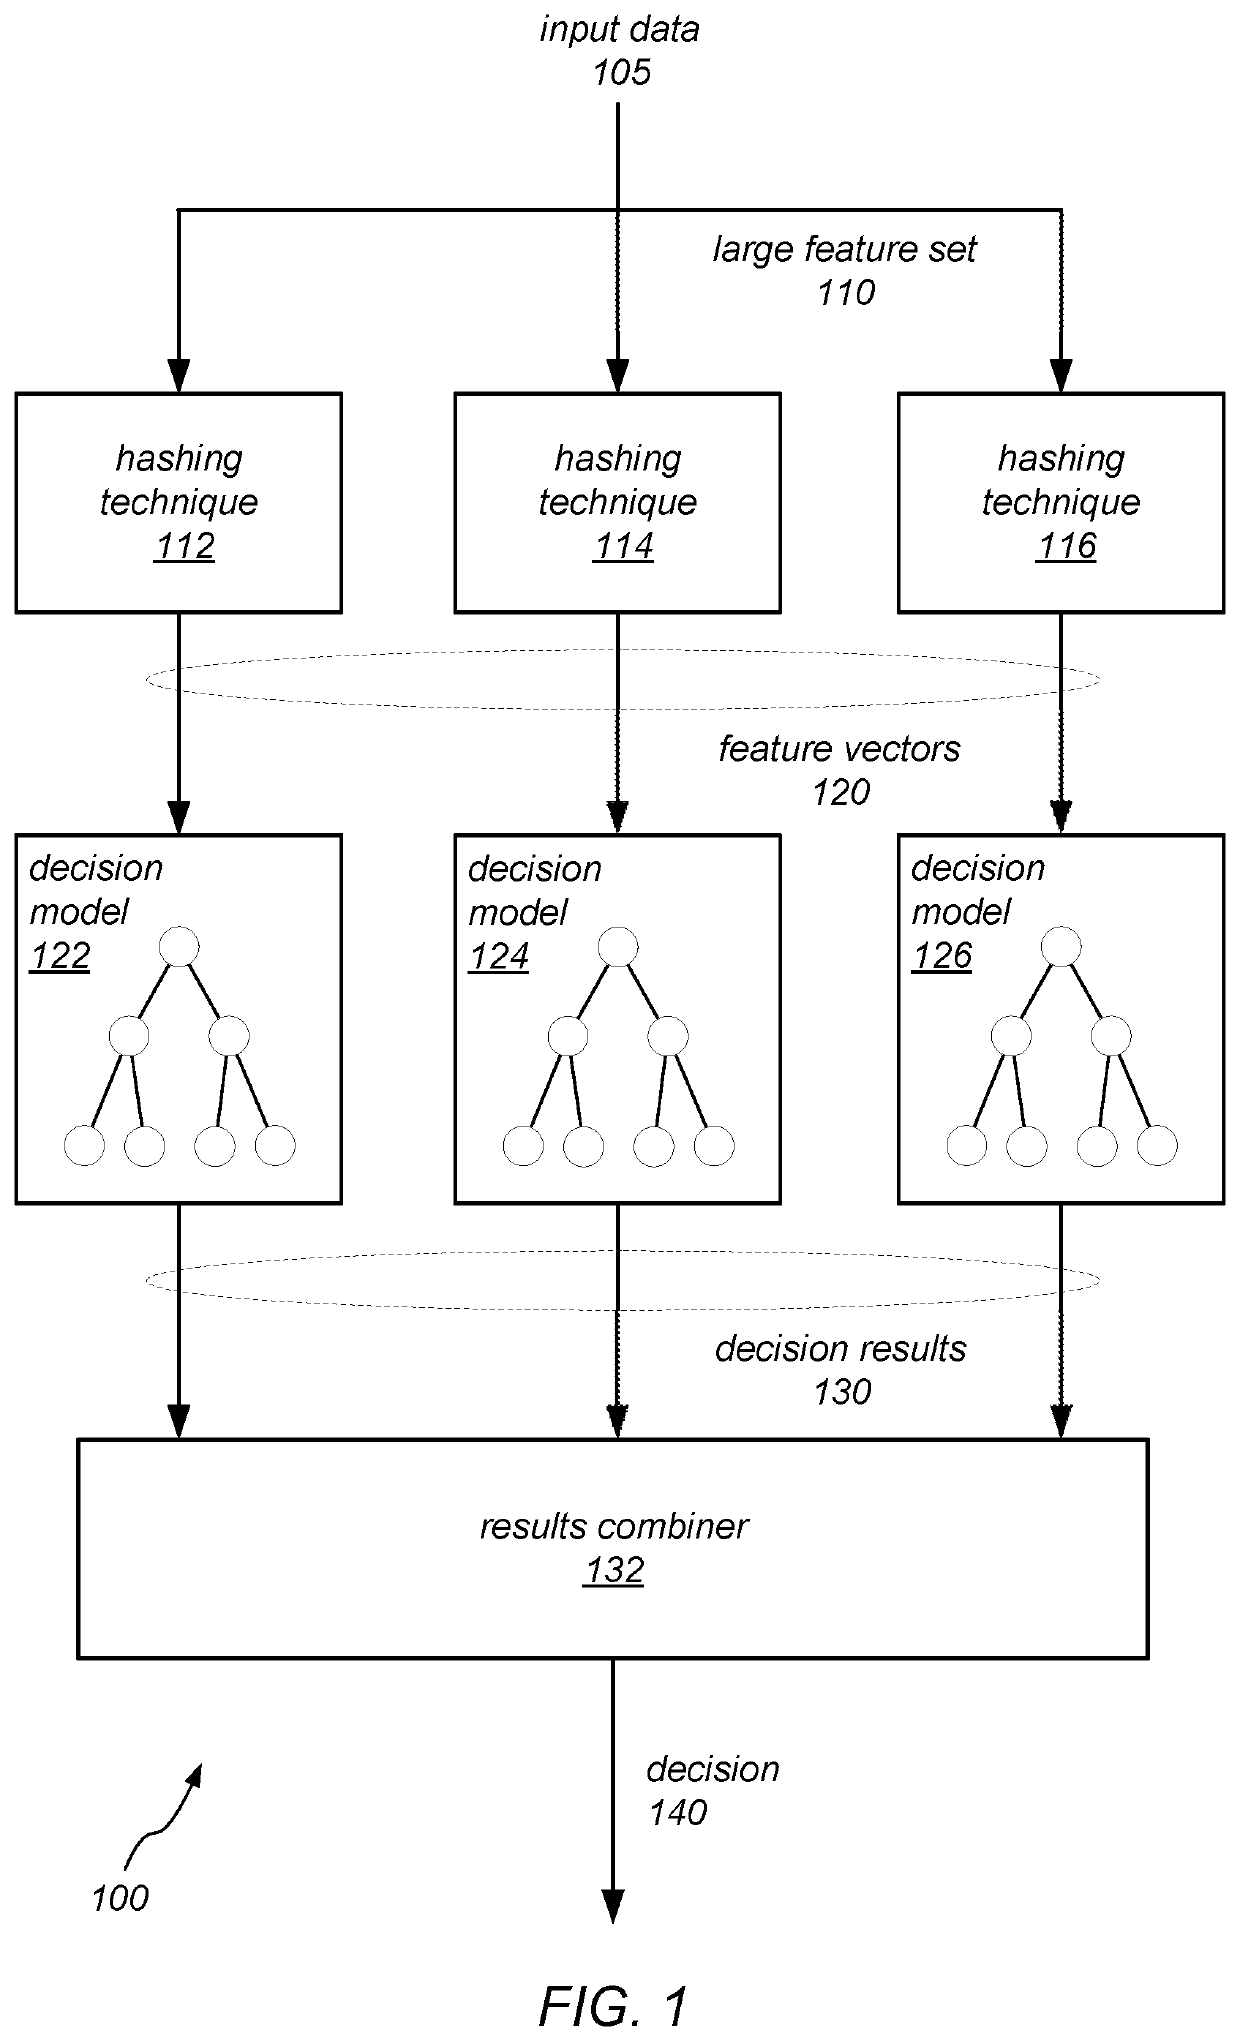 Ensembled decision systems using feature hashing models